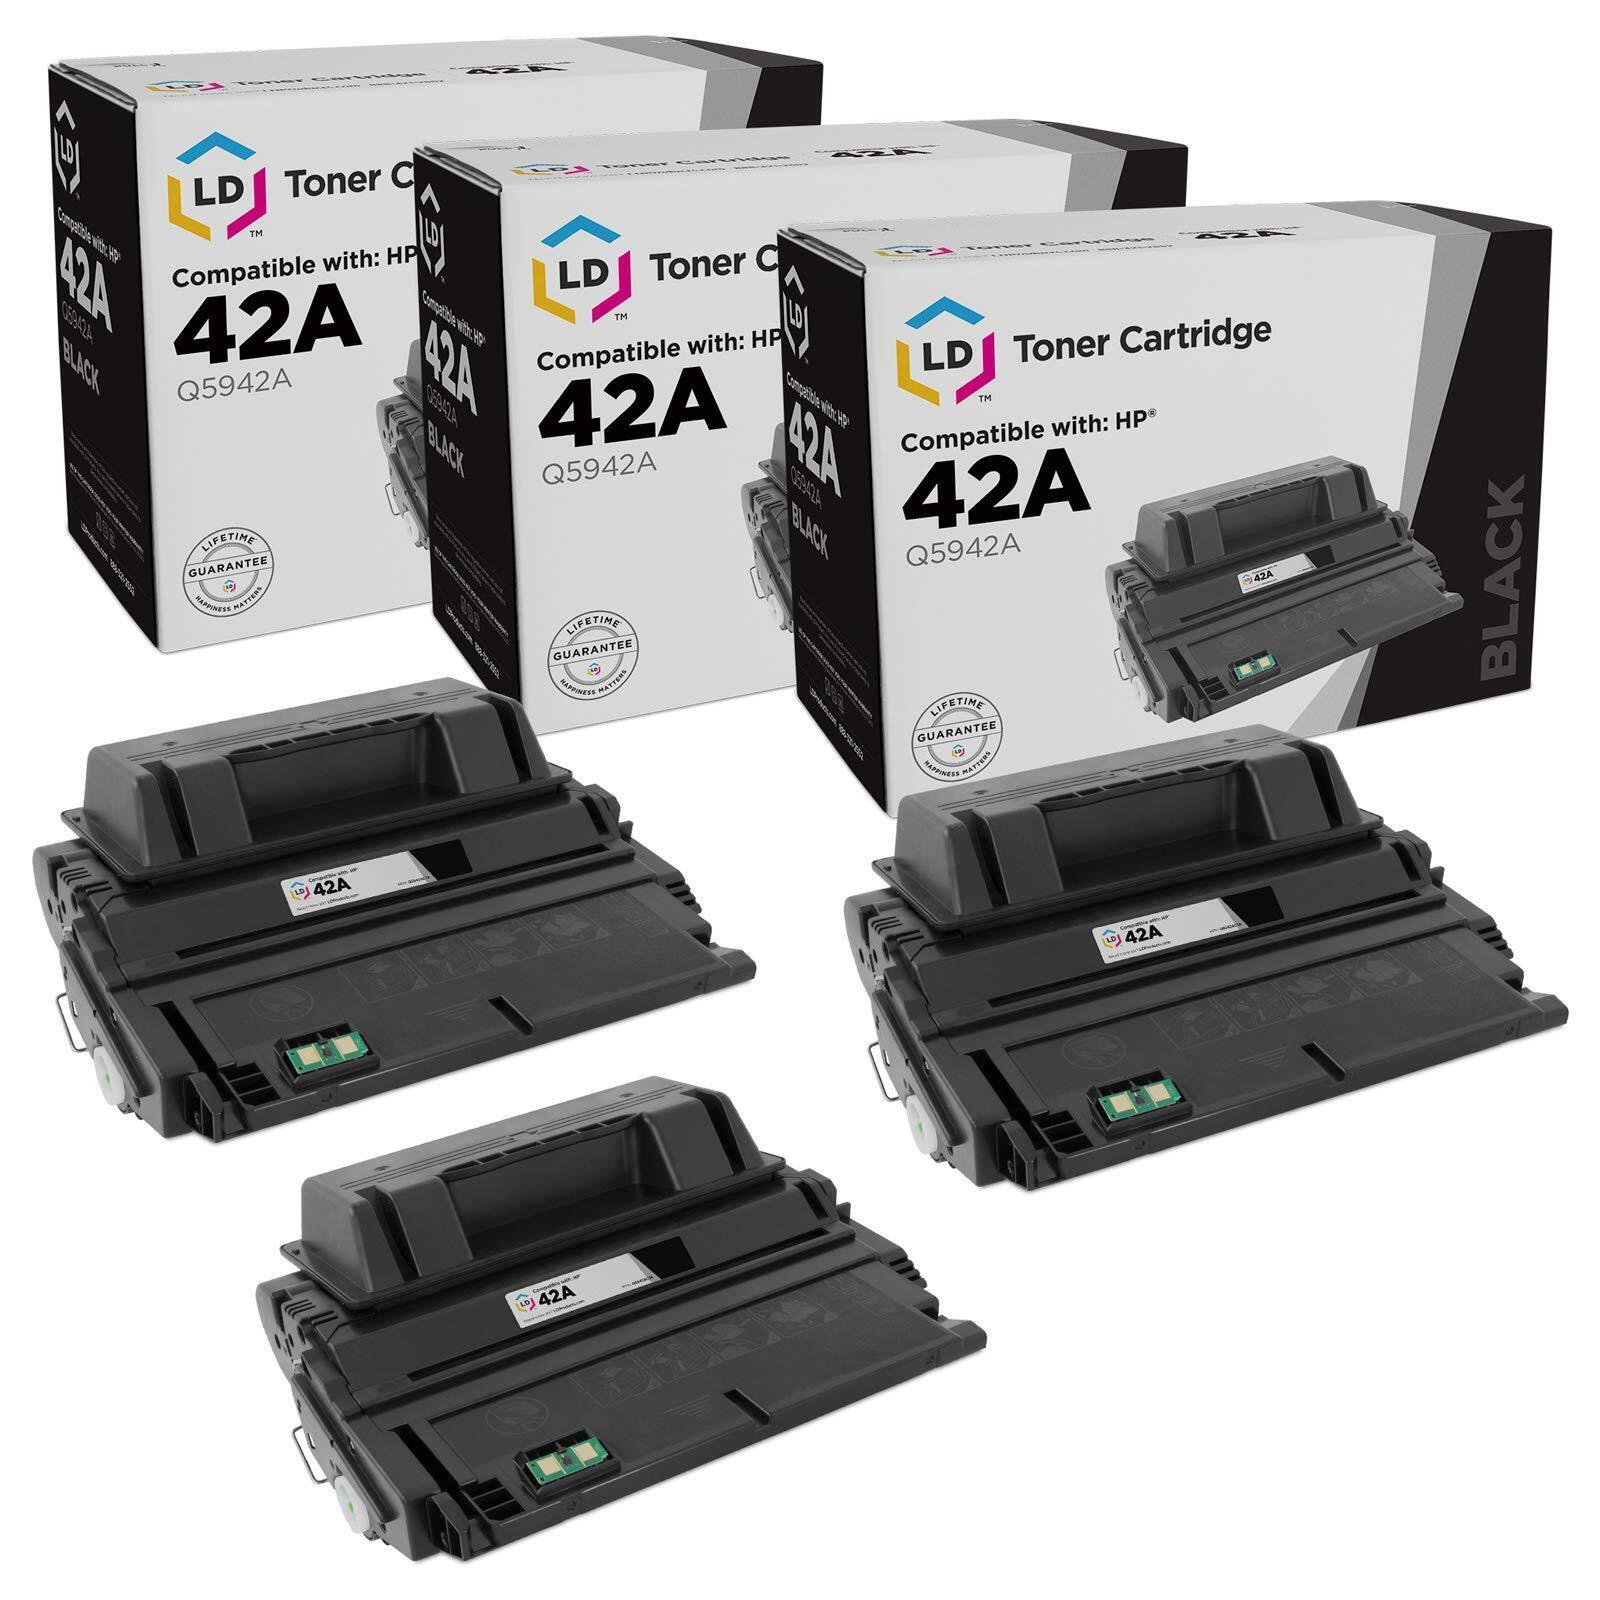 LD Compatible Replacement 3PK Q5942A 42A Black Toner for HP 4350 4240n 4350dtnsl